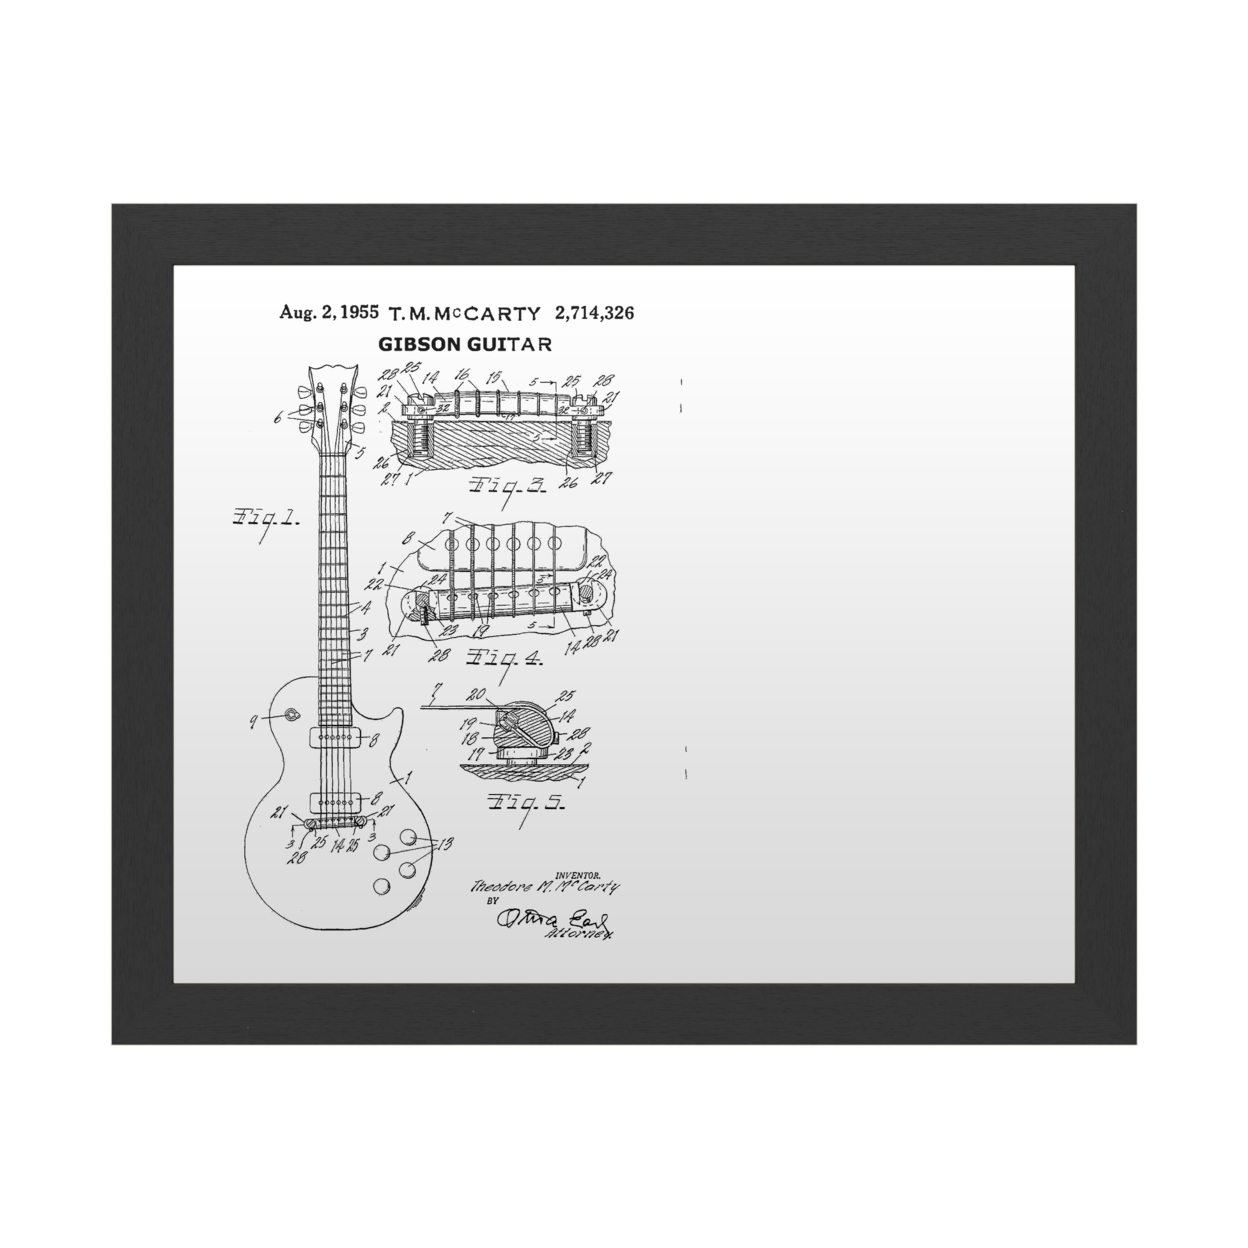 Dry Erase 16 X 20 Marker Board With Printed Artwork - Claire Doherty 1955 Mccarty Gibson Guitar Patent Black White Board - Ready To Hang